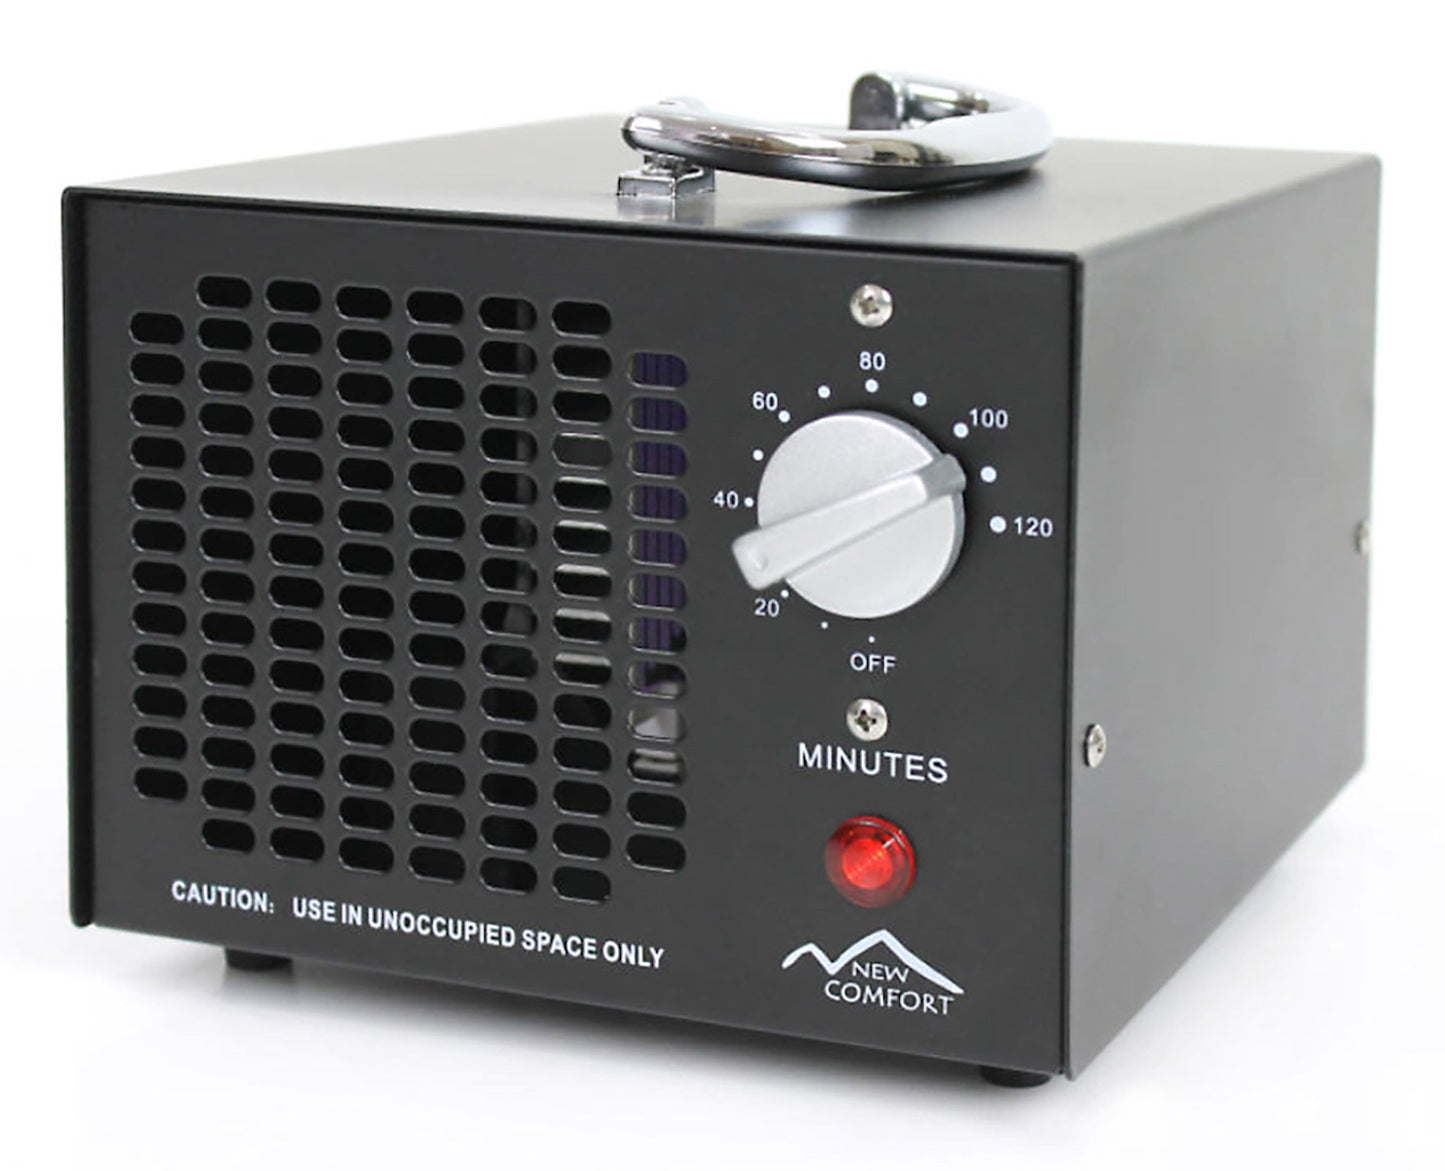 New Comfort Compact Odor Eliminating Commercial Ozone Generator by Prolux